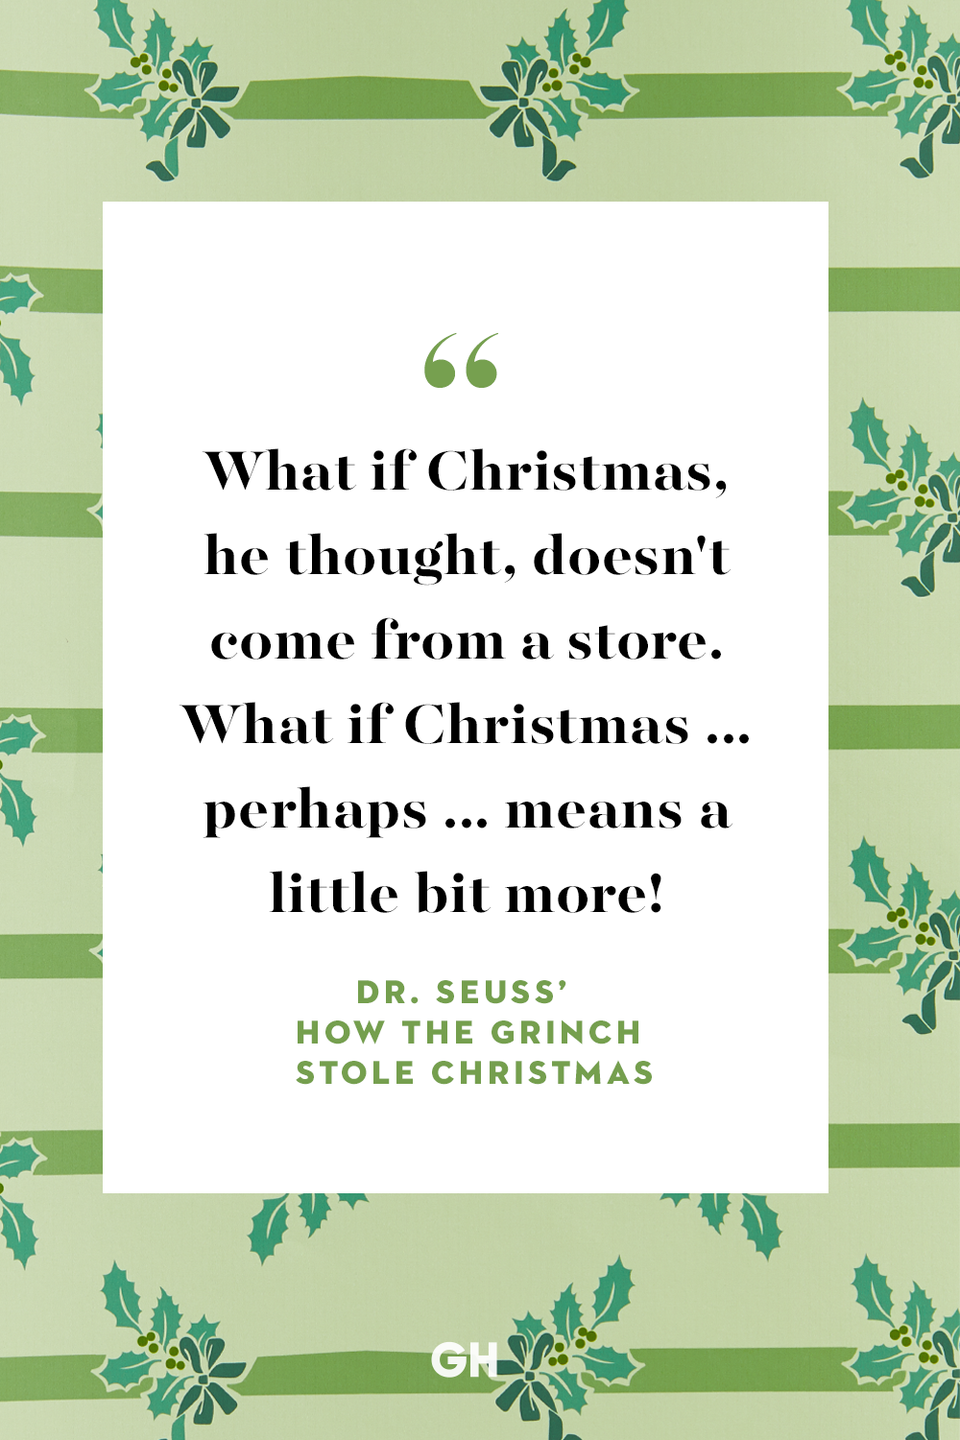 <p>What if Christmas, he thought, doesn't come from a store. What if Christmas ... perhaps ... means a little bit more!</p>